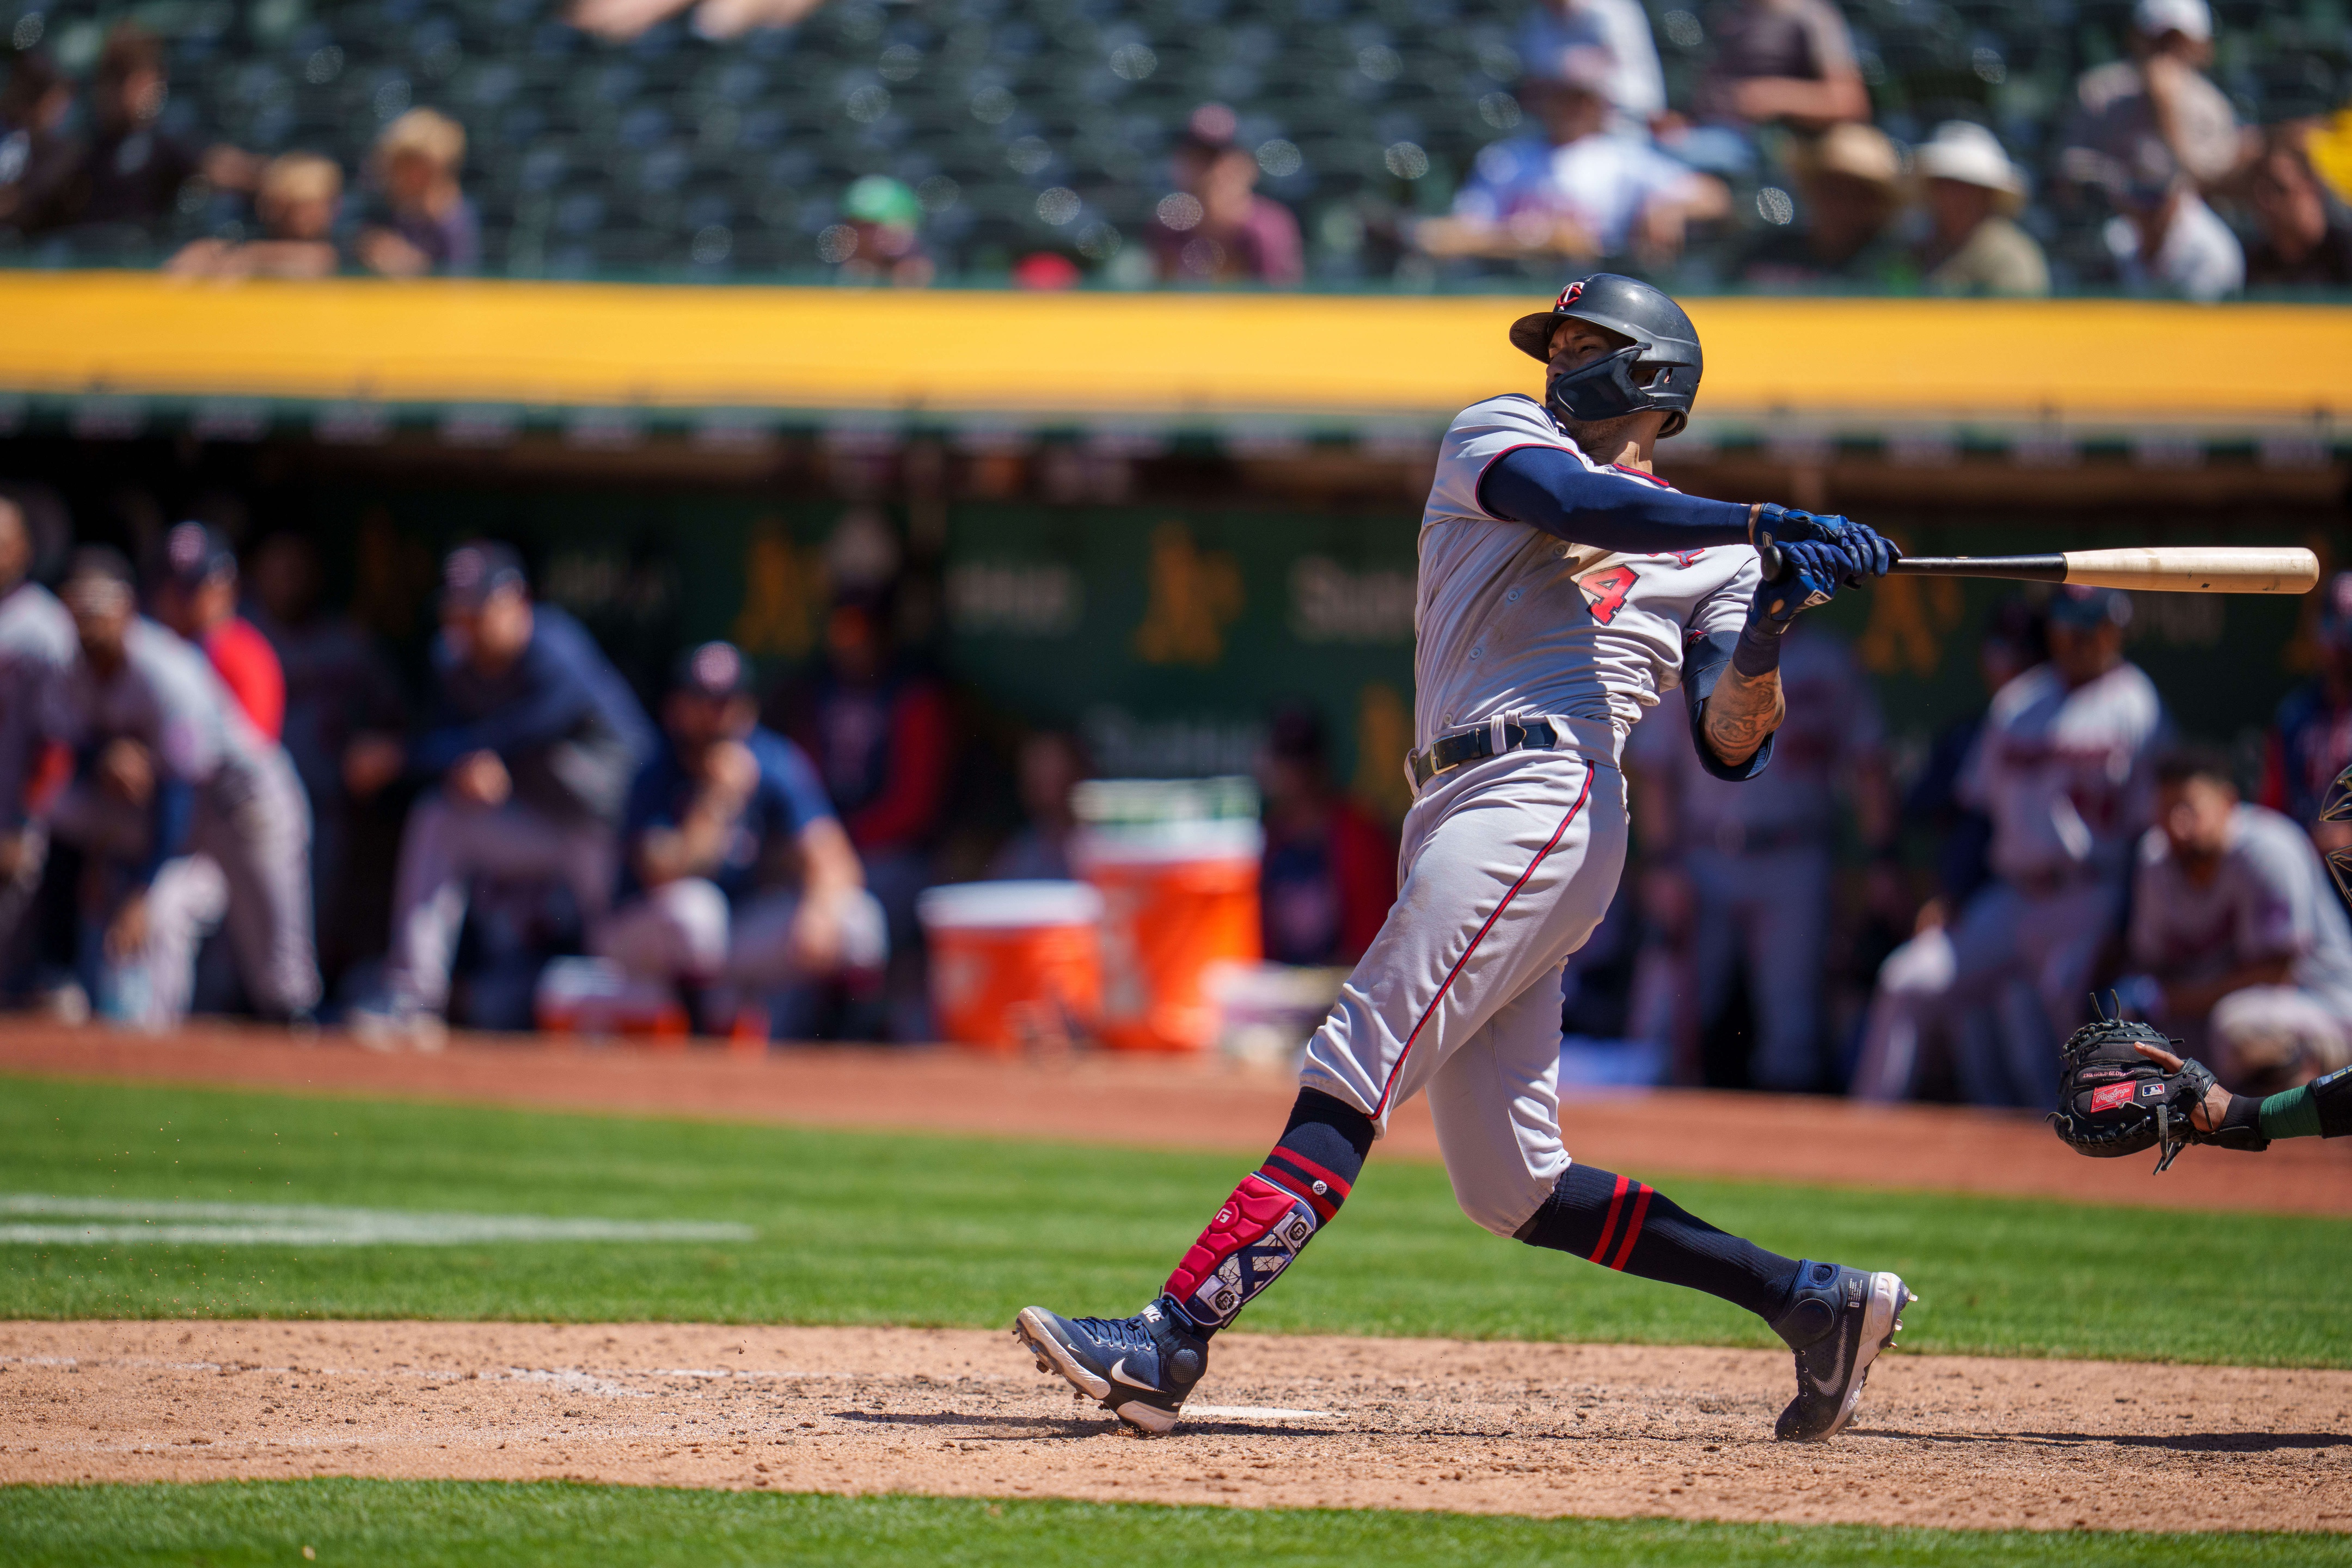 Correa’s return sparks Twins to series victory over A’s